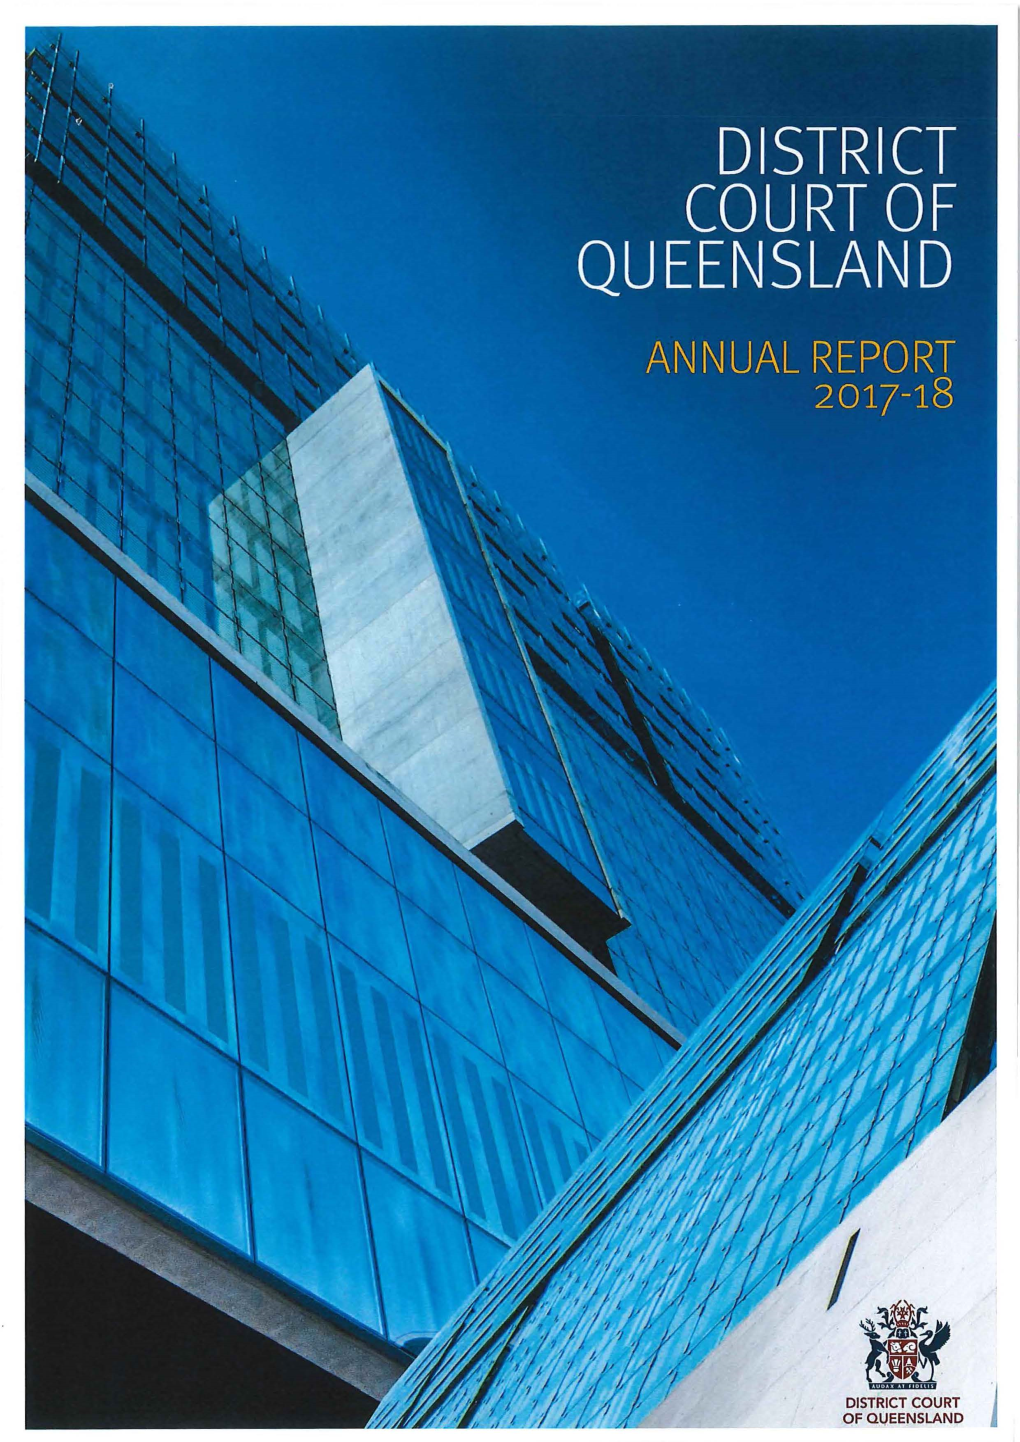 District Court of Queensland Act 1967, I Enclose My Report on the Operation of the District Court of Queensland for the Year Ended 30 June 2018